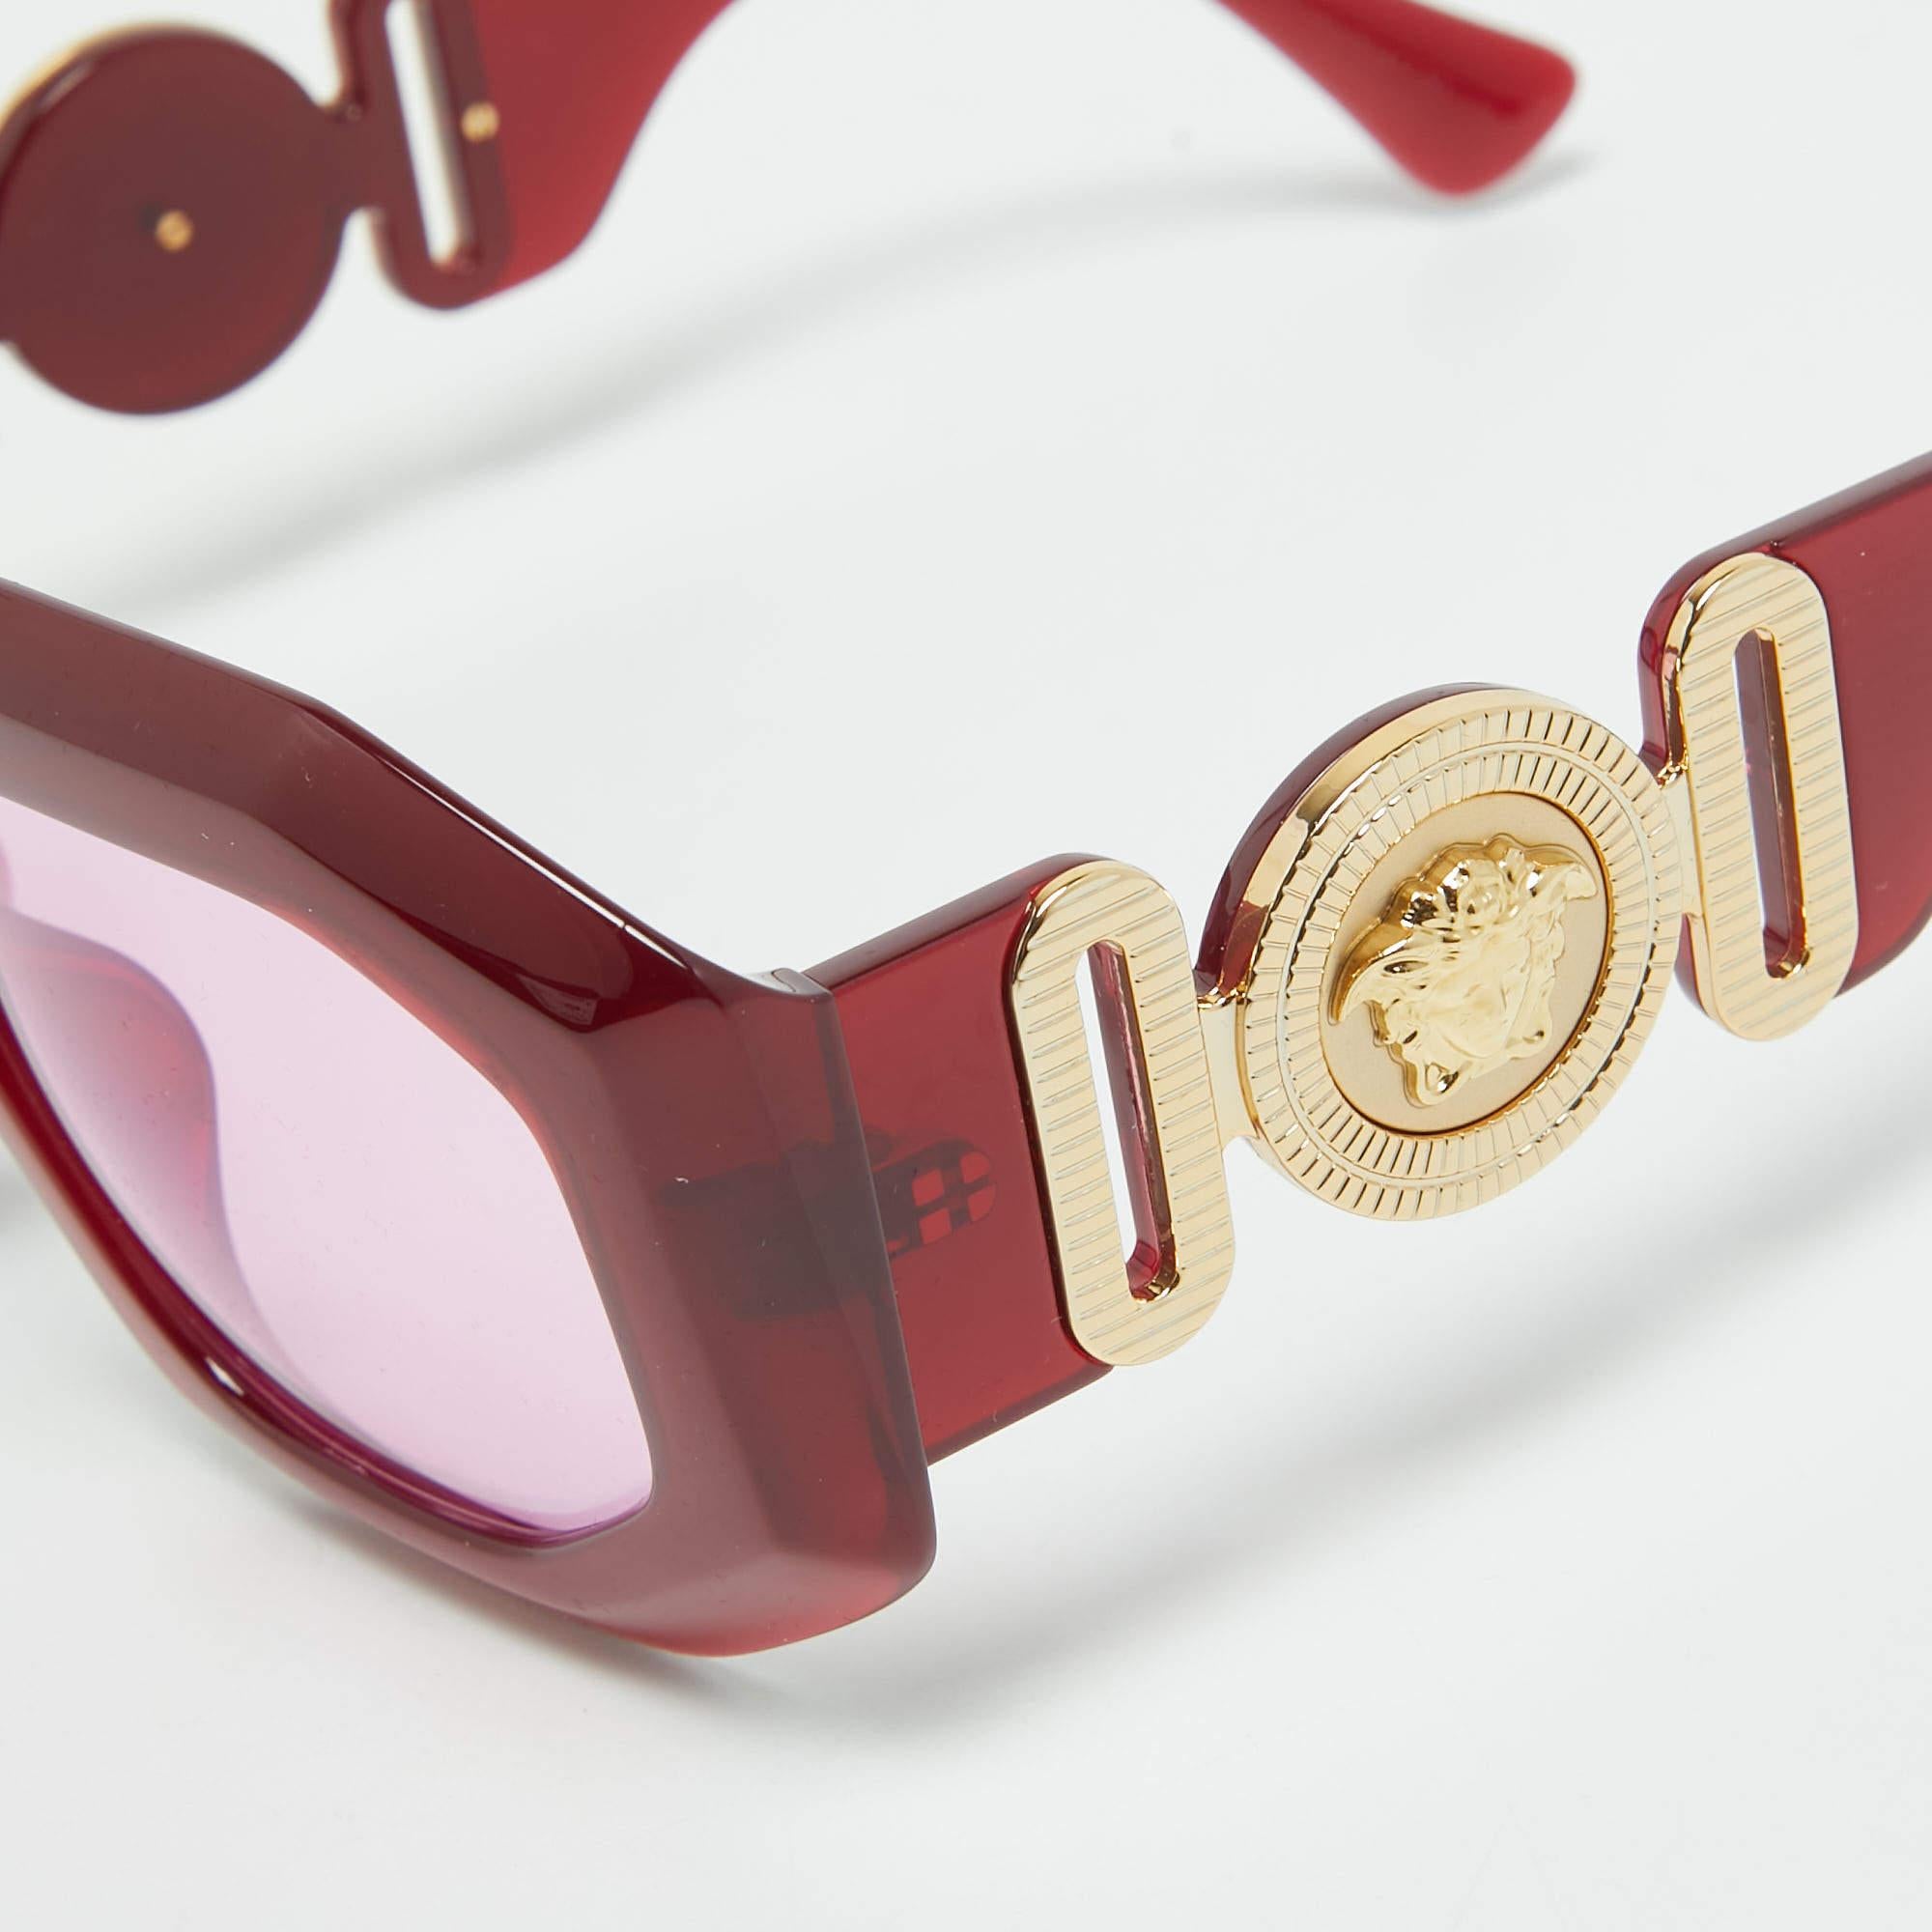 Embrace sunny days in full style with help from this pair of Medusa sunglasses by Versace. Created with expertise, the luxe sunglasses feature a well-designed frame and high-grade lenses that are equipped to protect your eyes.

